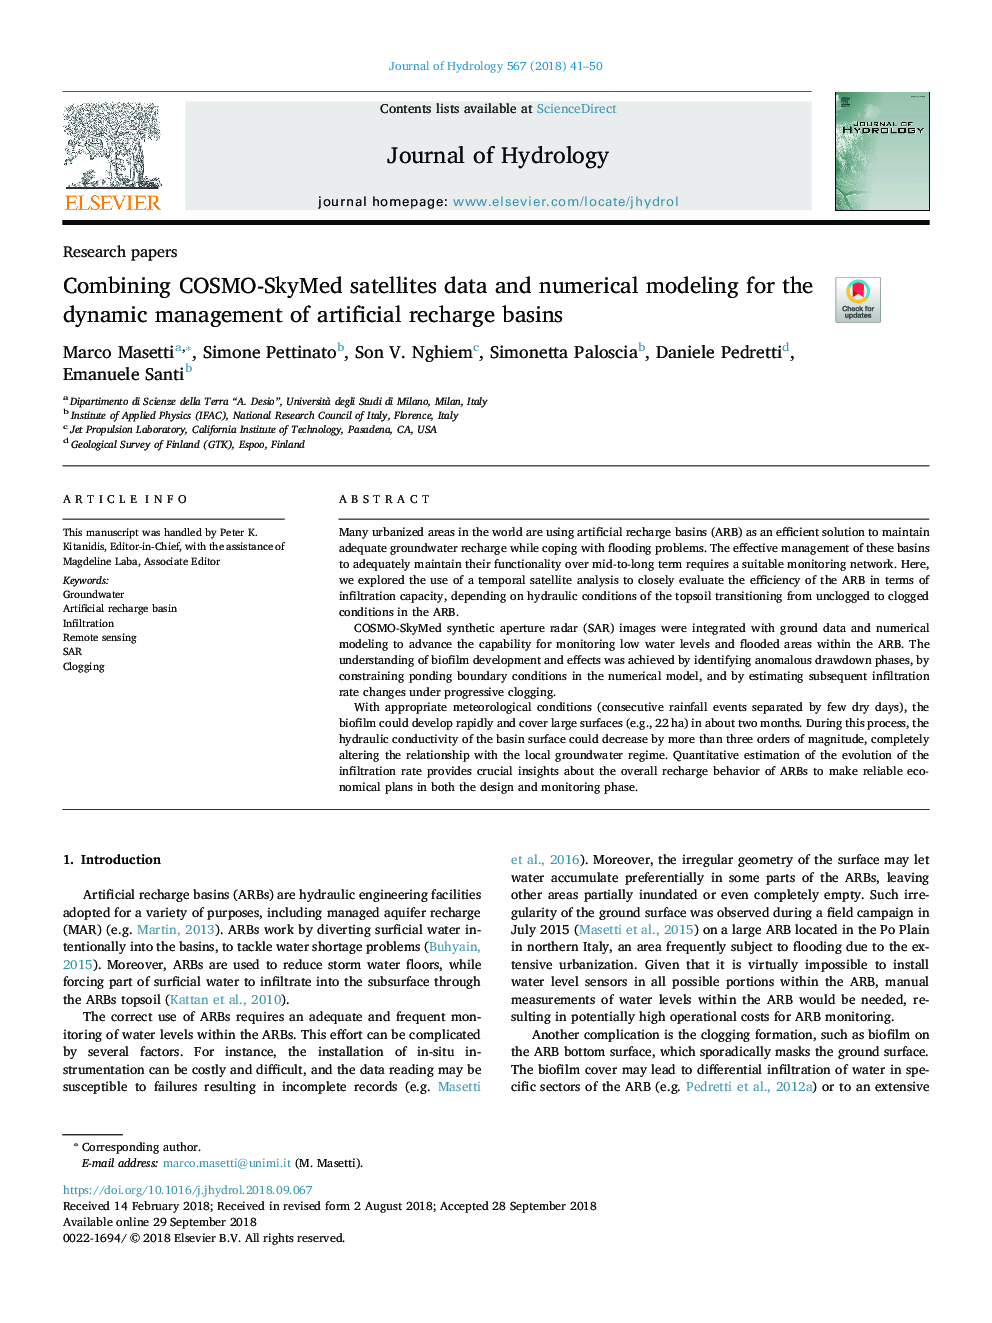 Combining COSMO-SkyMed satellites data and numerical modeling for the dynamic management of artificial recharge basins